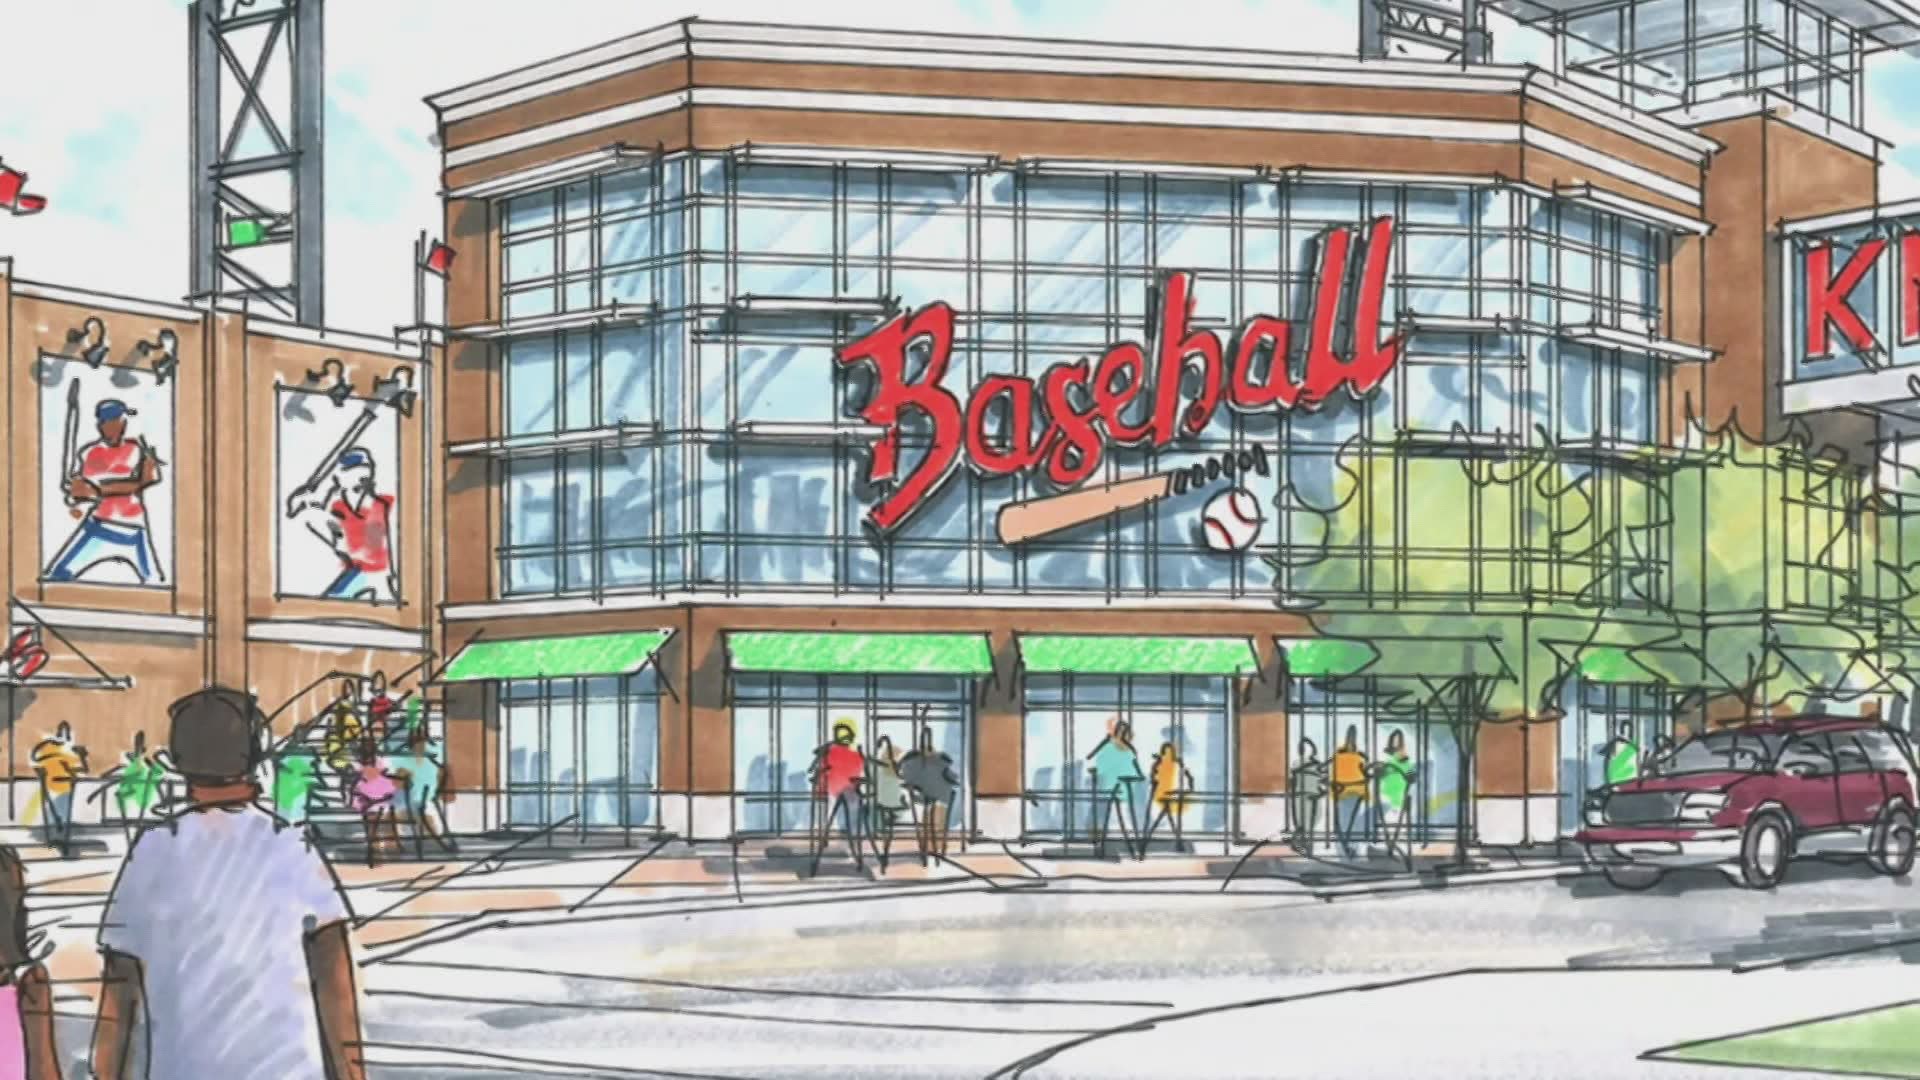 State lawmakers passed a measure paving the way for a new baseball stadium in East Knoxville on Tuesday.